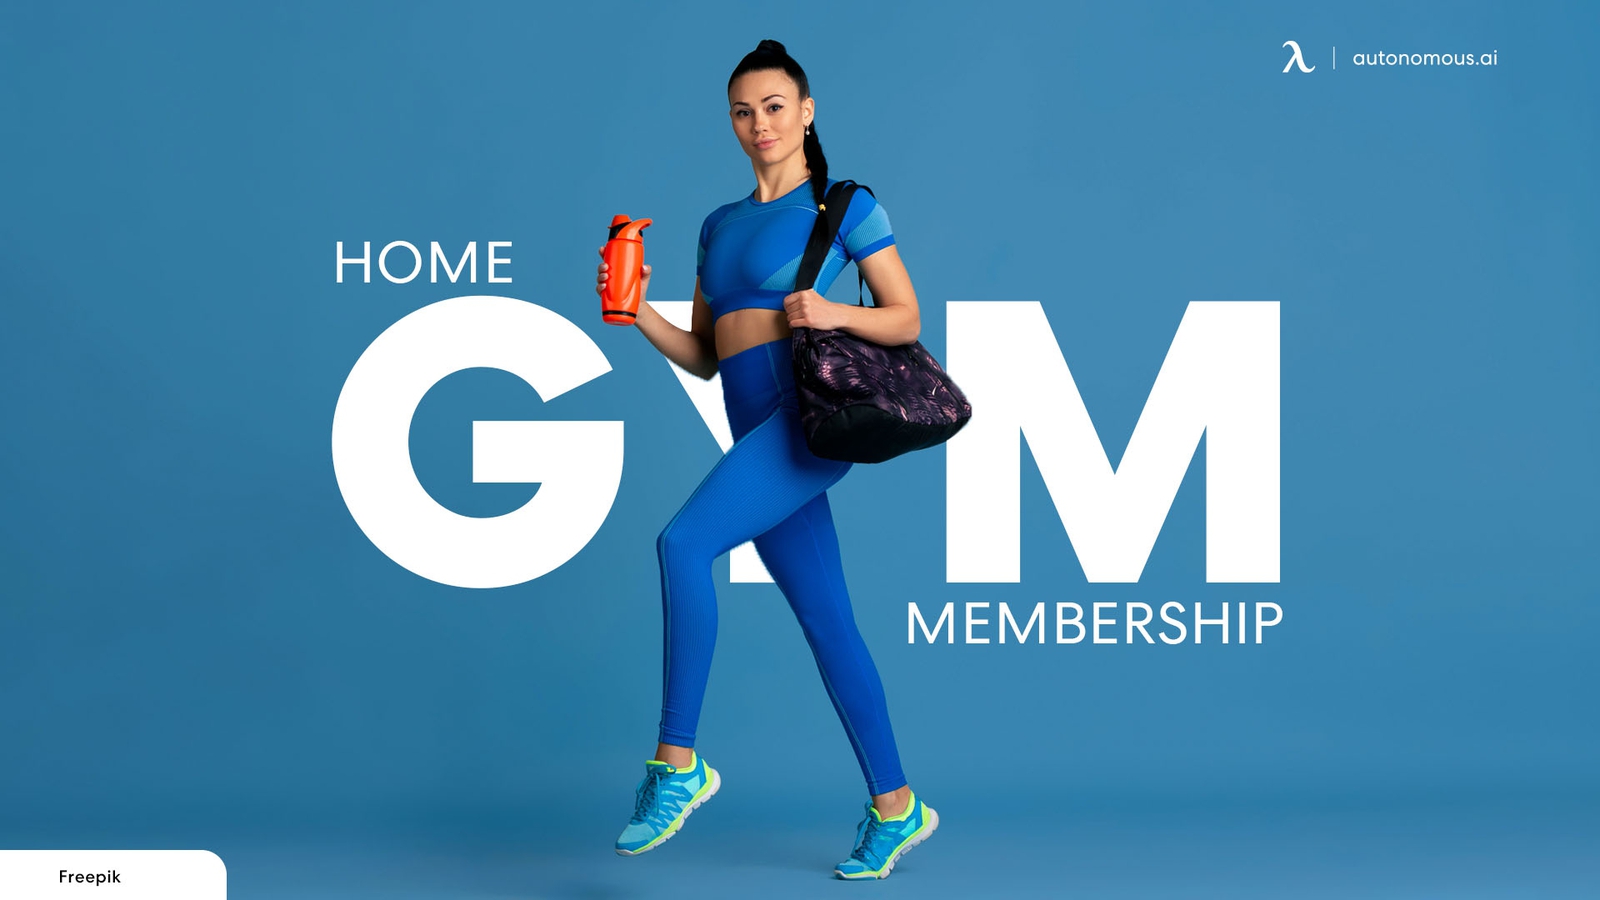 Home Gym vs. Gym Memberships: Pros and Cons